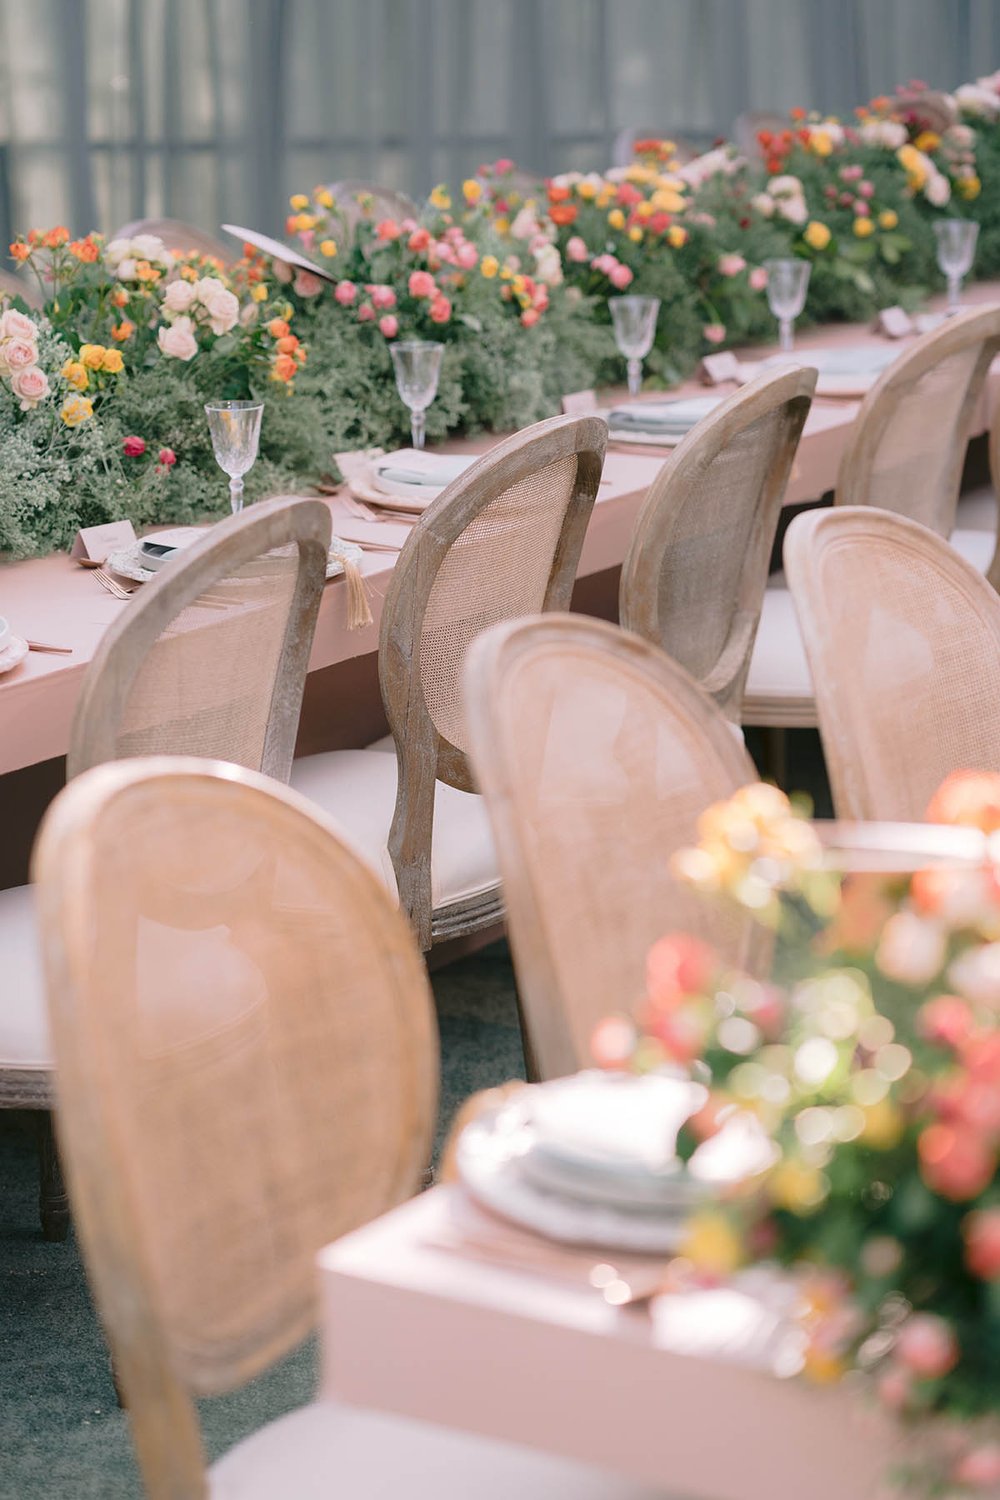 Colorful spring wedding florals on long dining tables - an LA reception designed by Eddie Zaratsian Lifestyle and Design